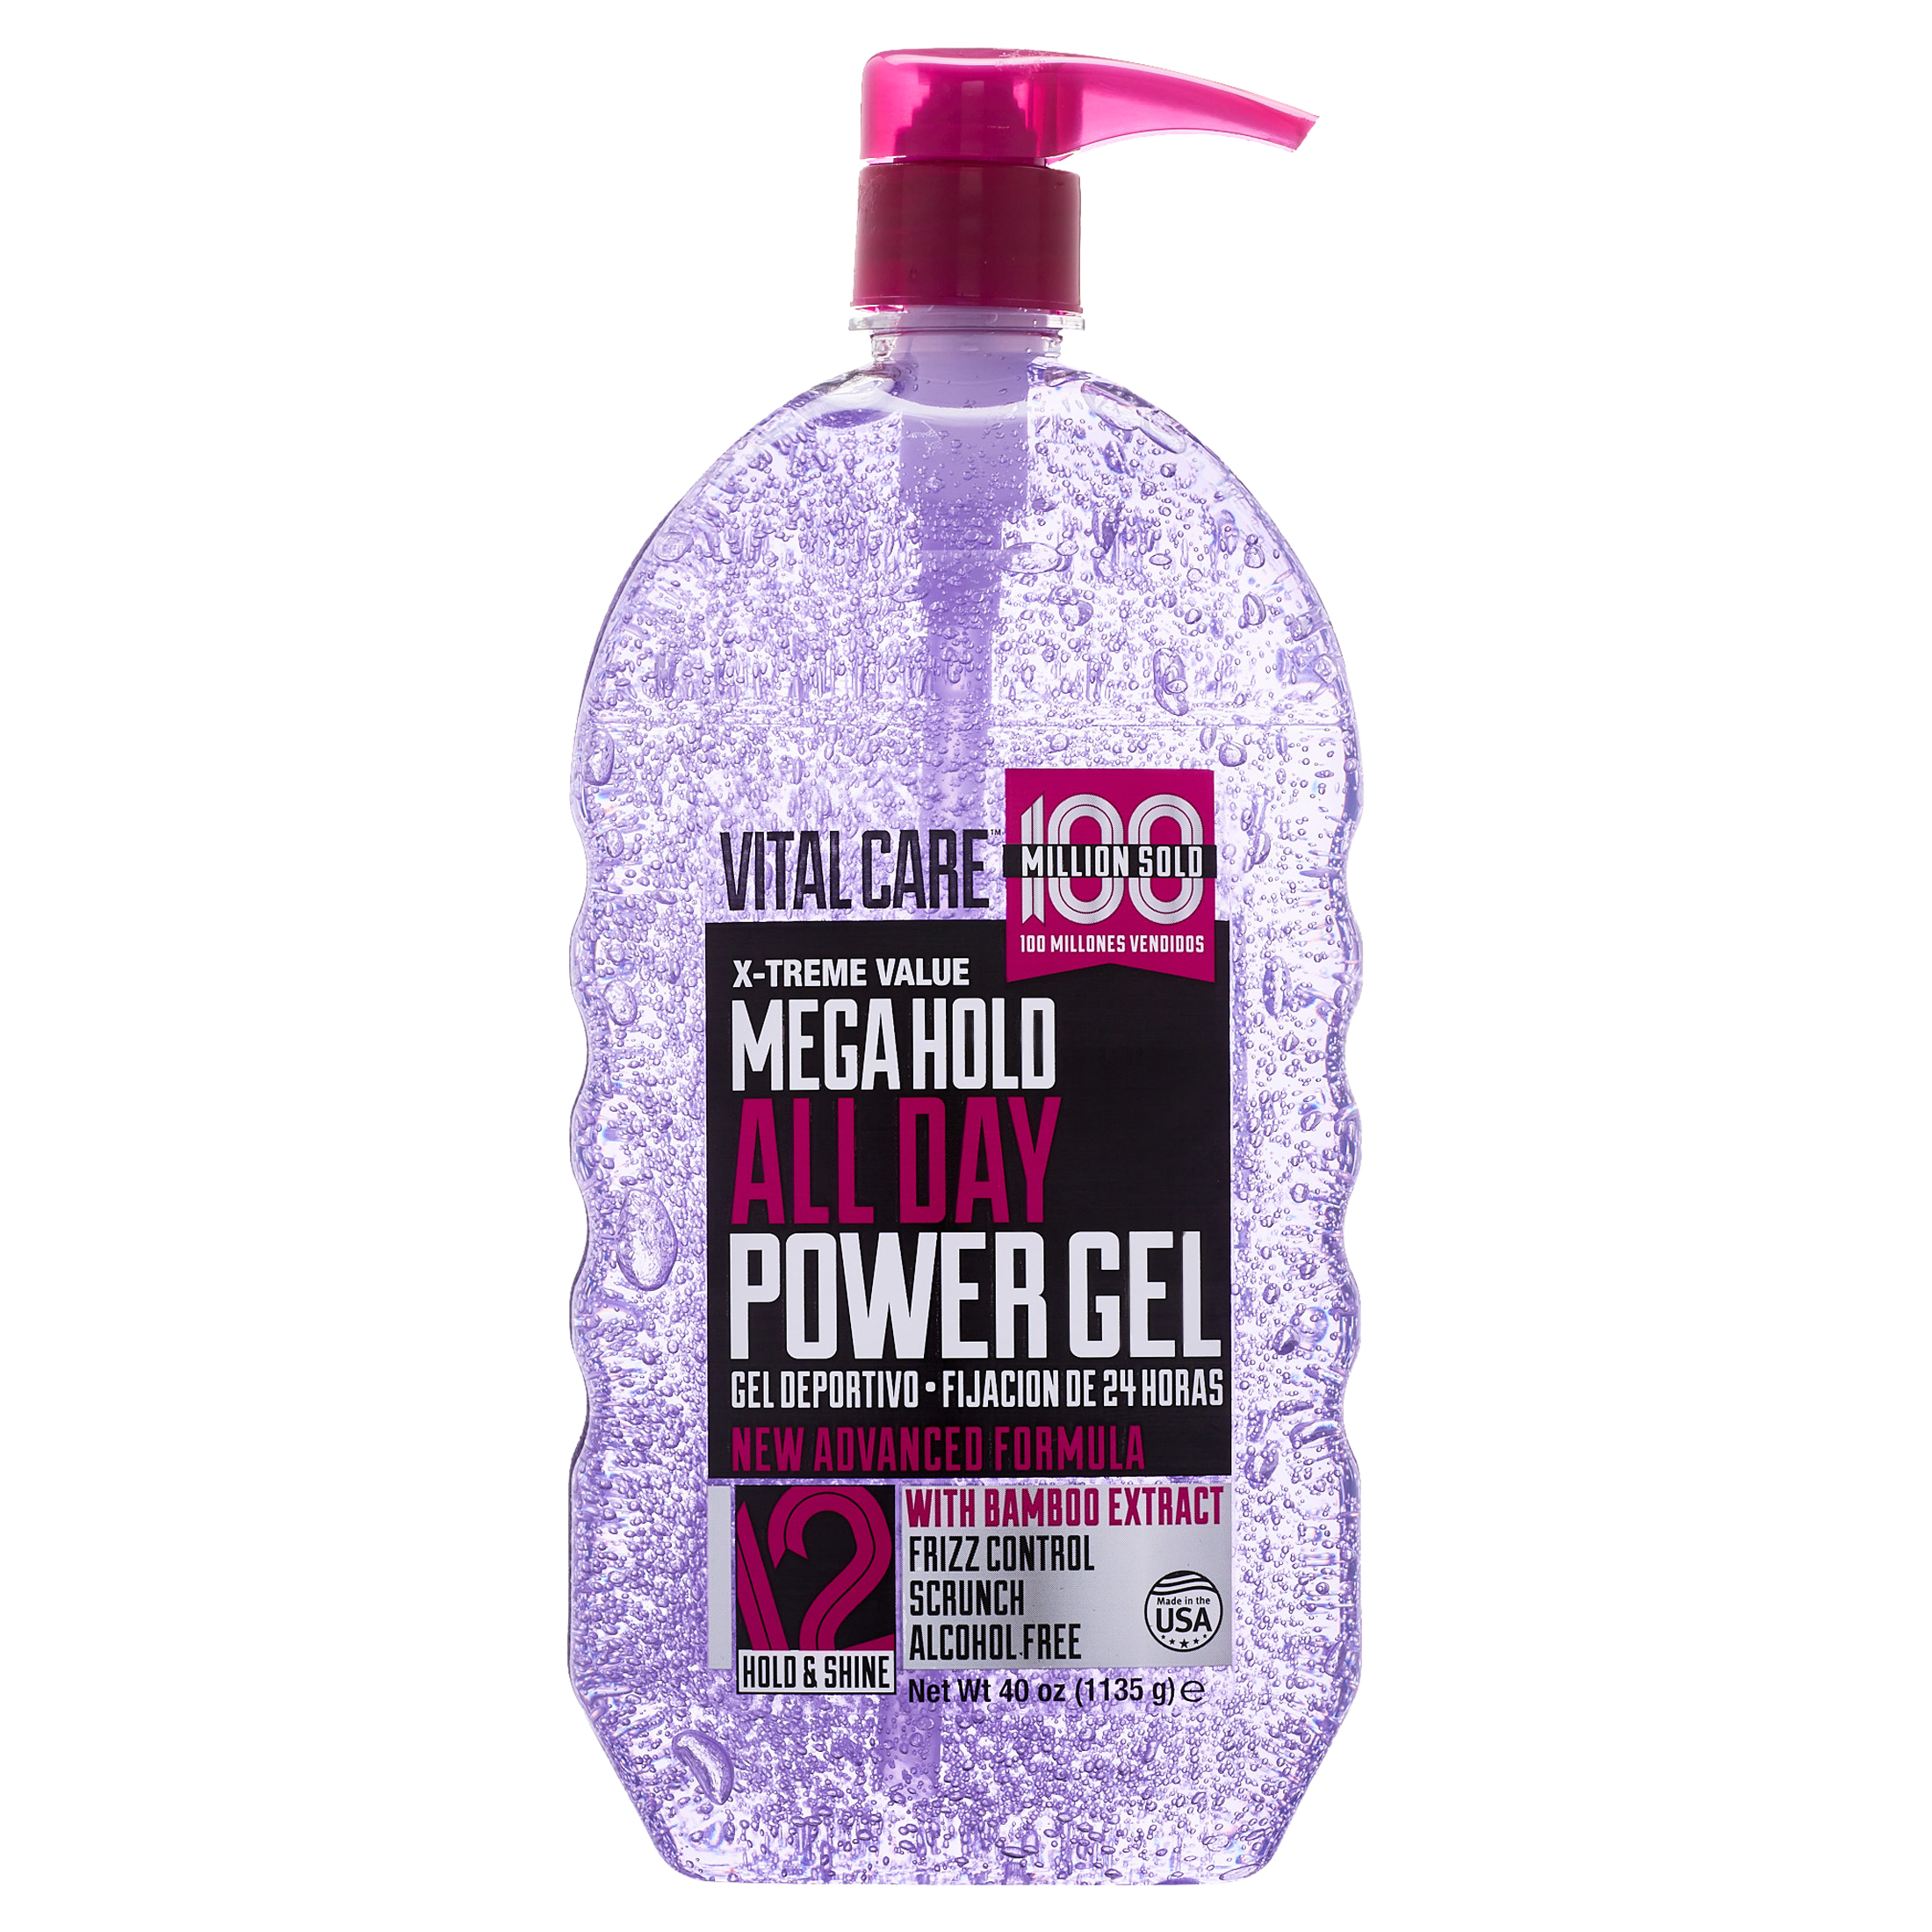 Vital Care Mega Hold All Day Power Frizz Control & Shine Enhancing Pump Hair Styling Gel with Pro-Vitamin B-5 & Panthenol, 40 oz - image 1 of 4